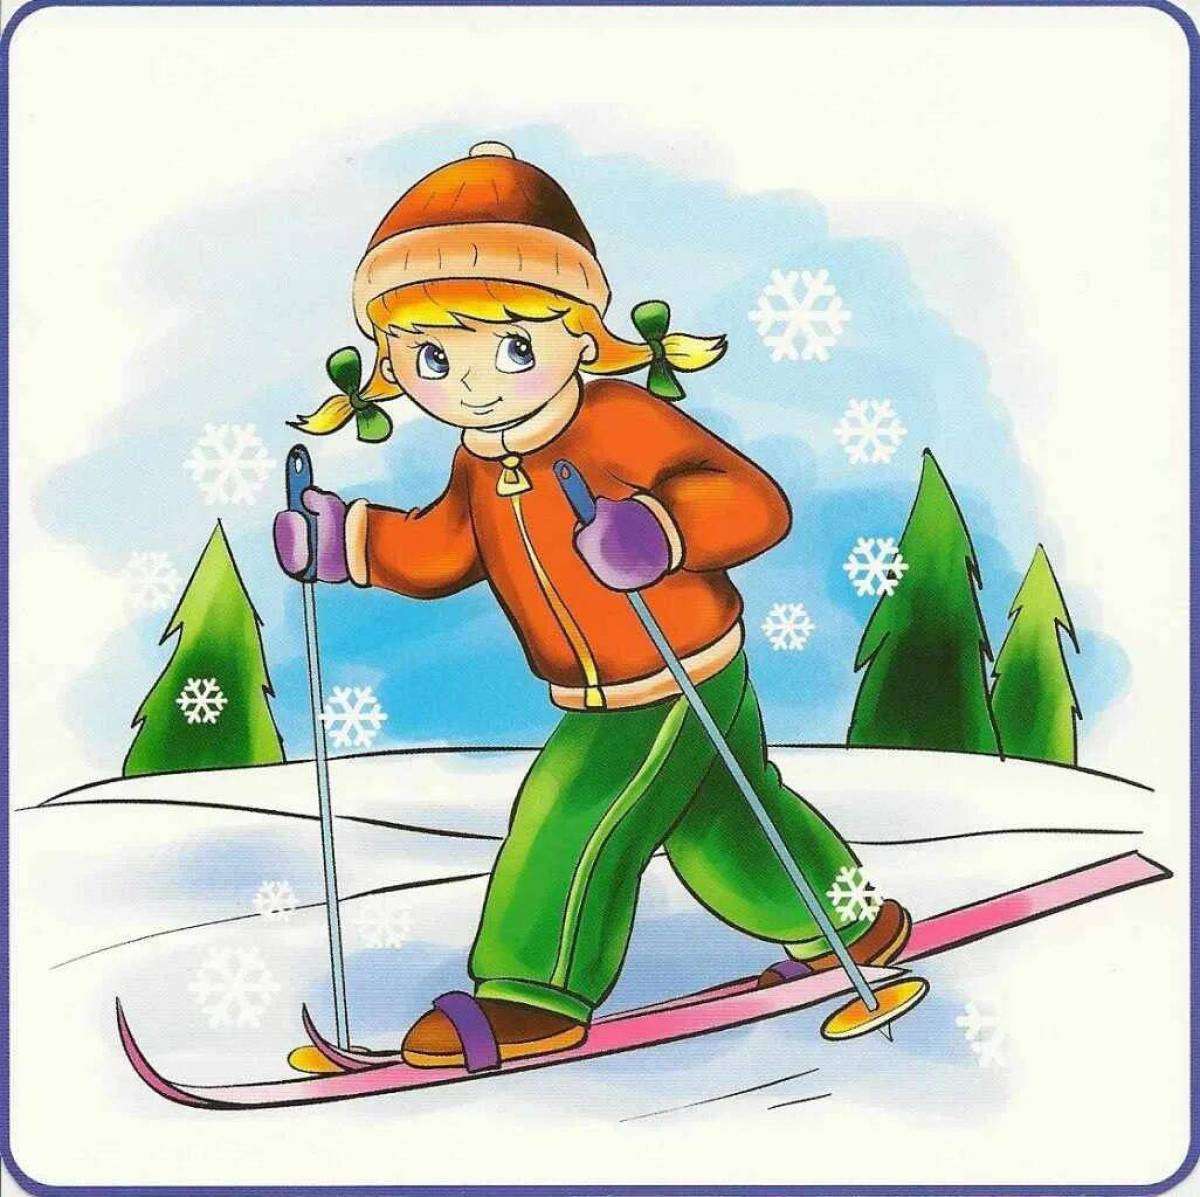 skier puzzle online from photo